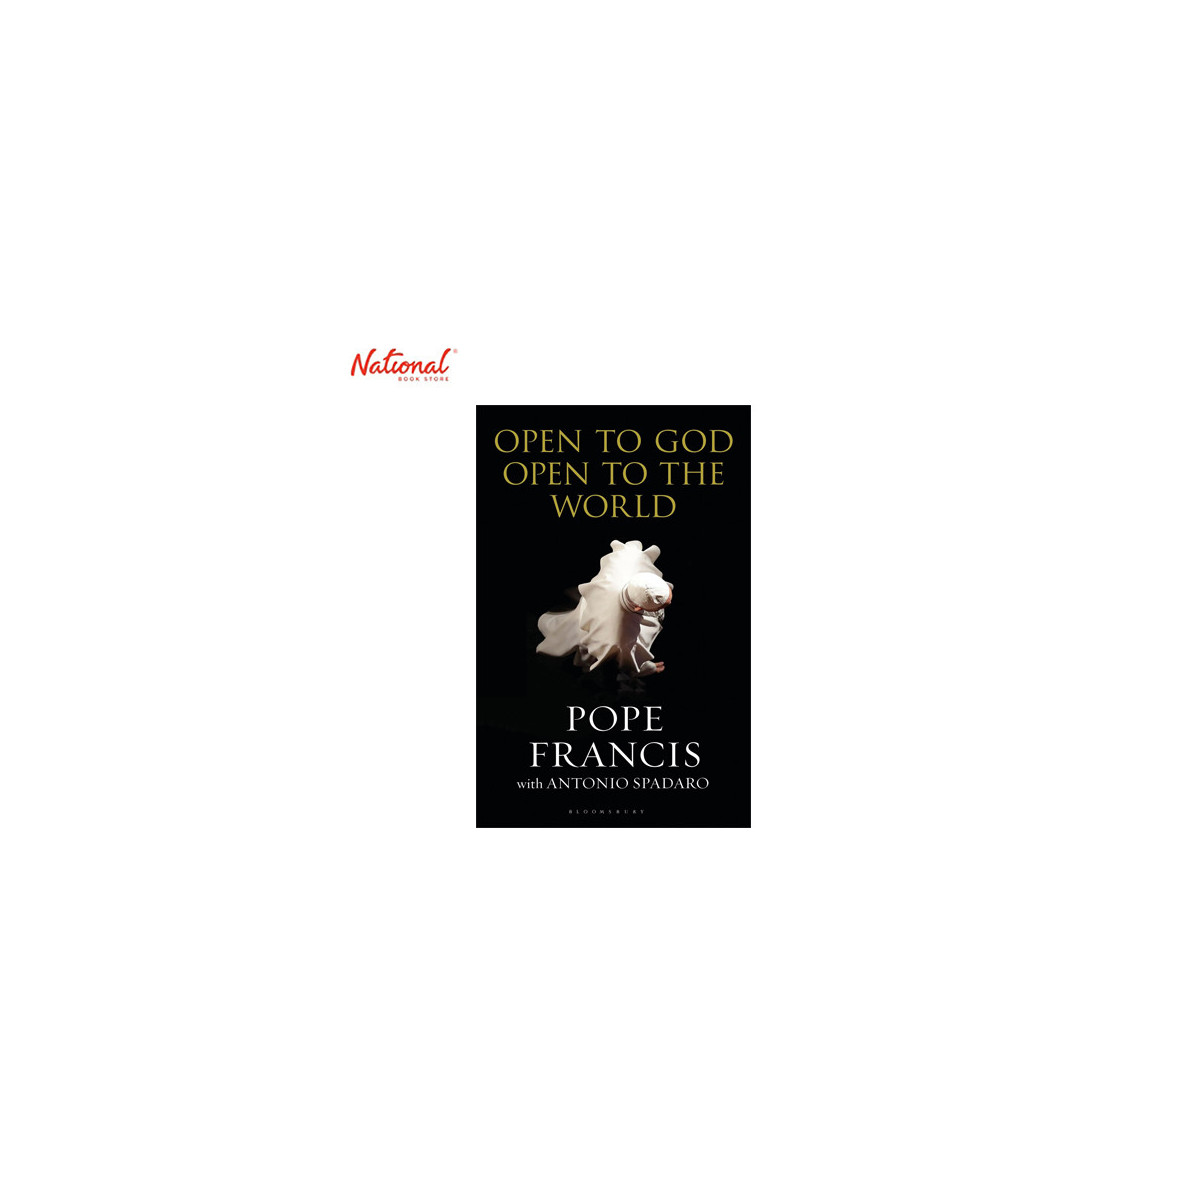 Open to God Open to the World Trade Paperback by Pope Francis & Antonio Spadaro